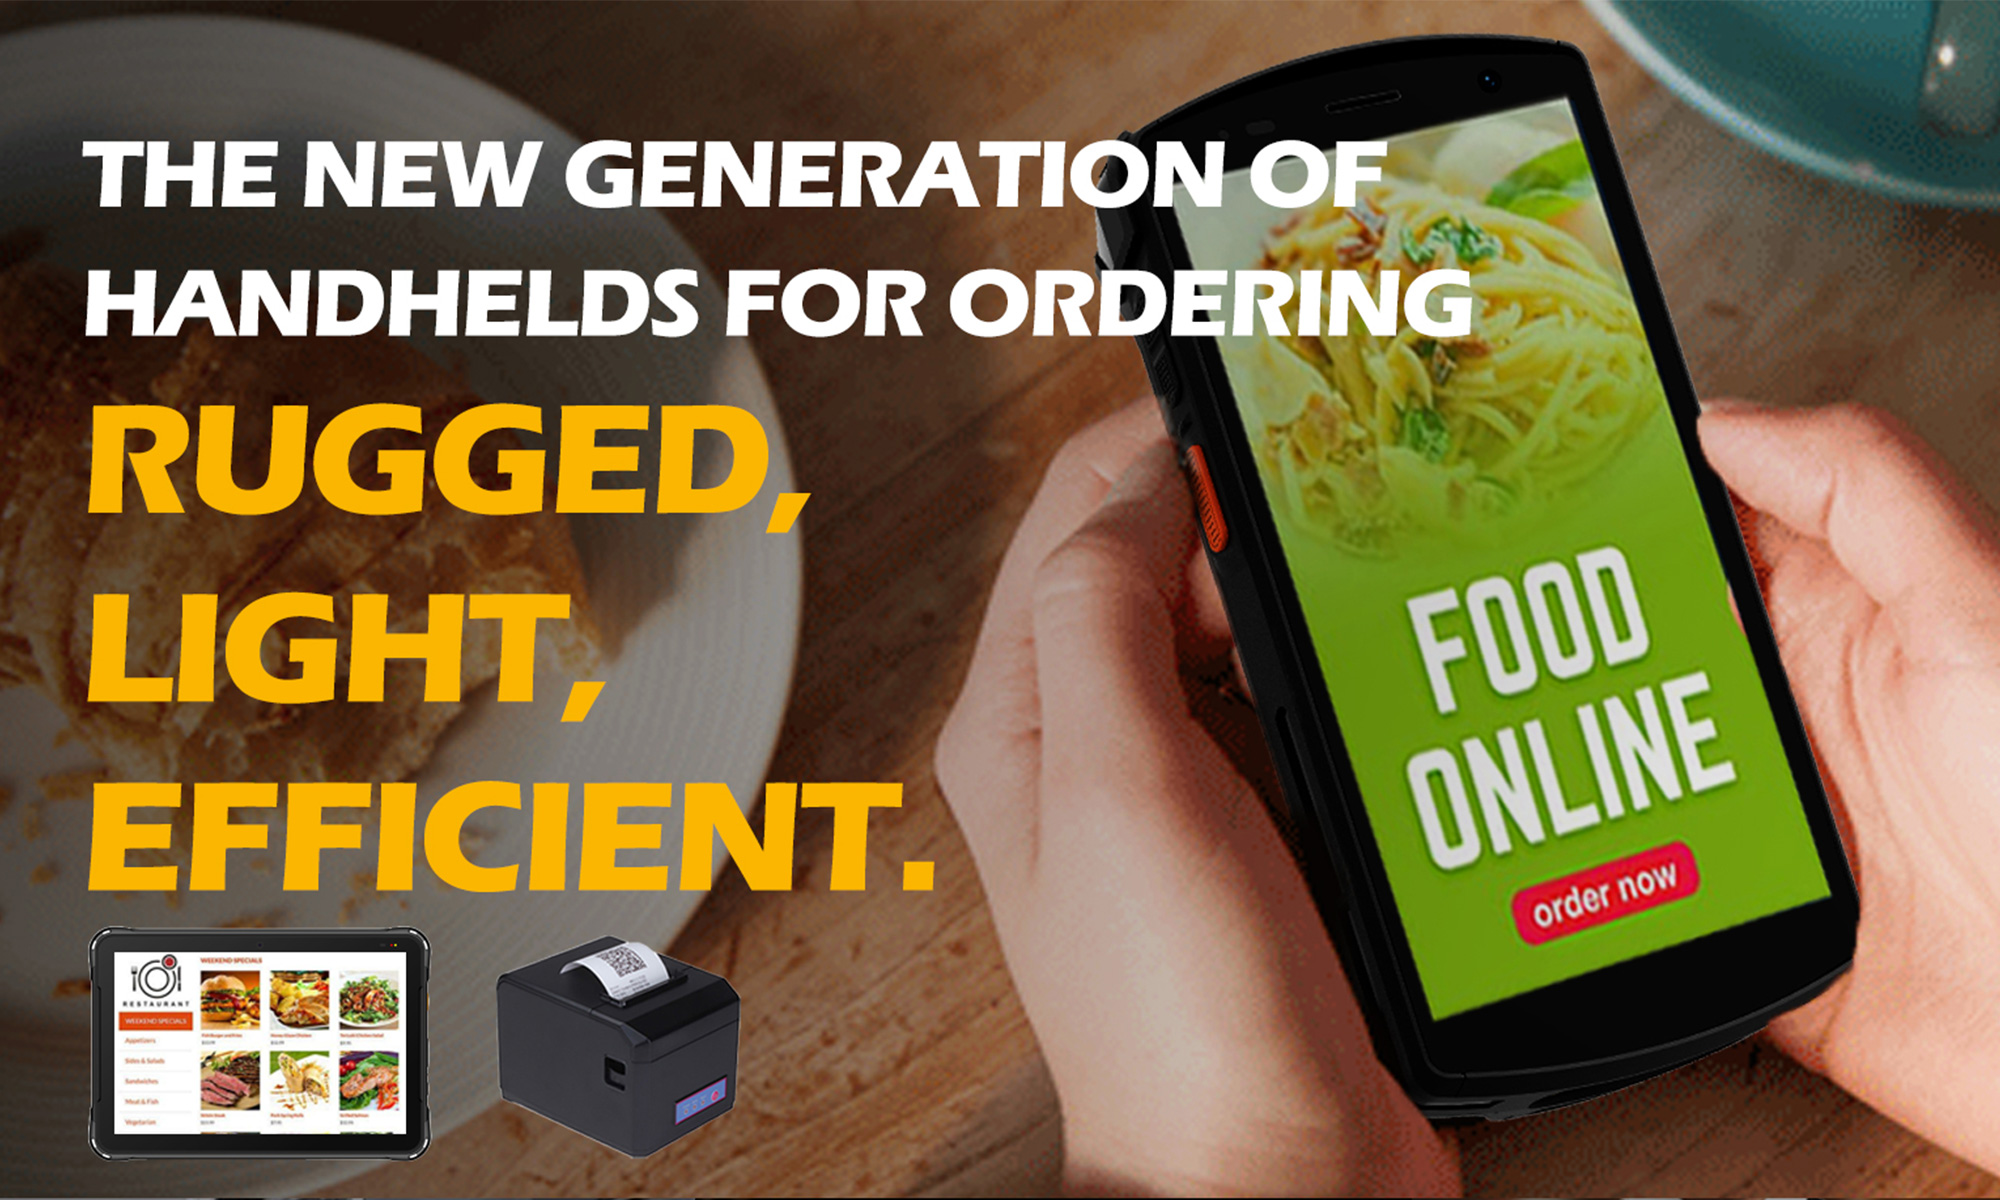 The New Generation of Handheld PDA for Ordering: Rugged, Light, Efficient